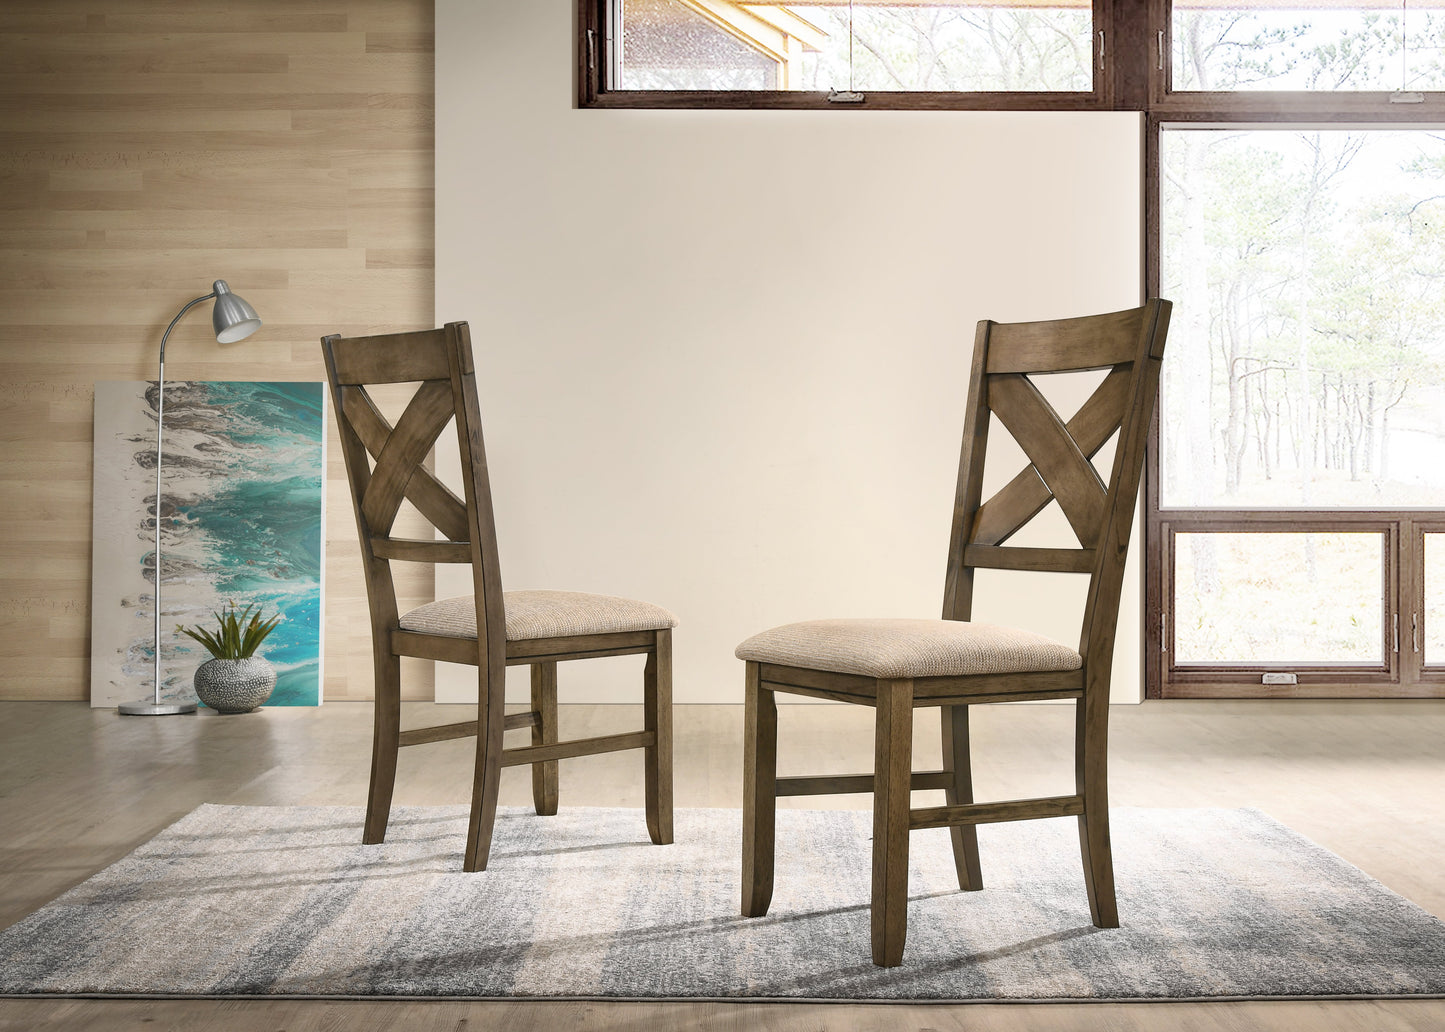 Raven Wood Dining Set: Butterlfy Leaf Table, Four Chairs, Bench